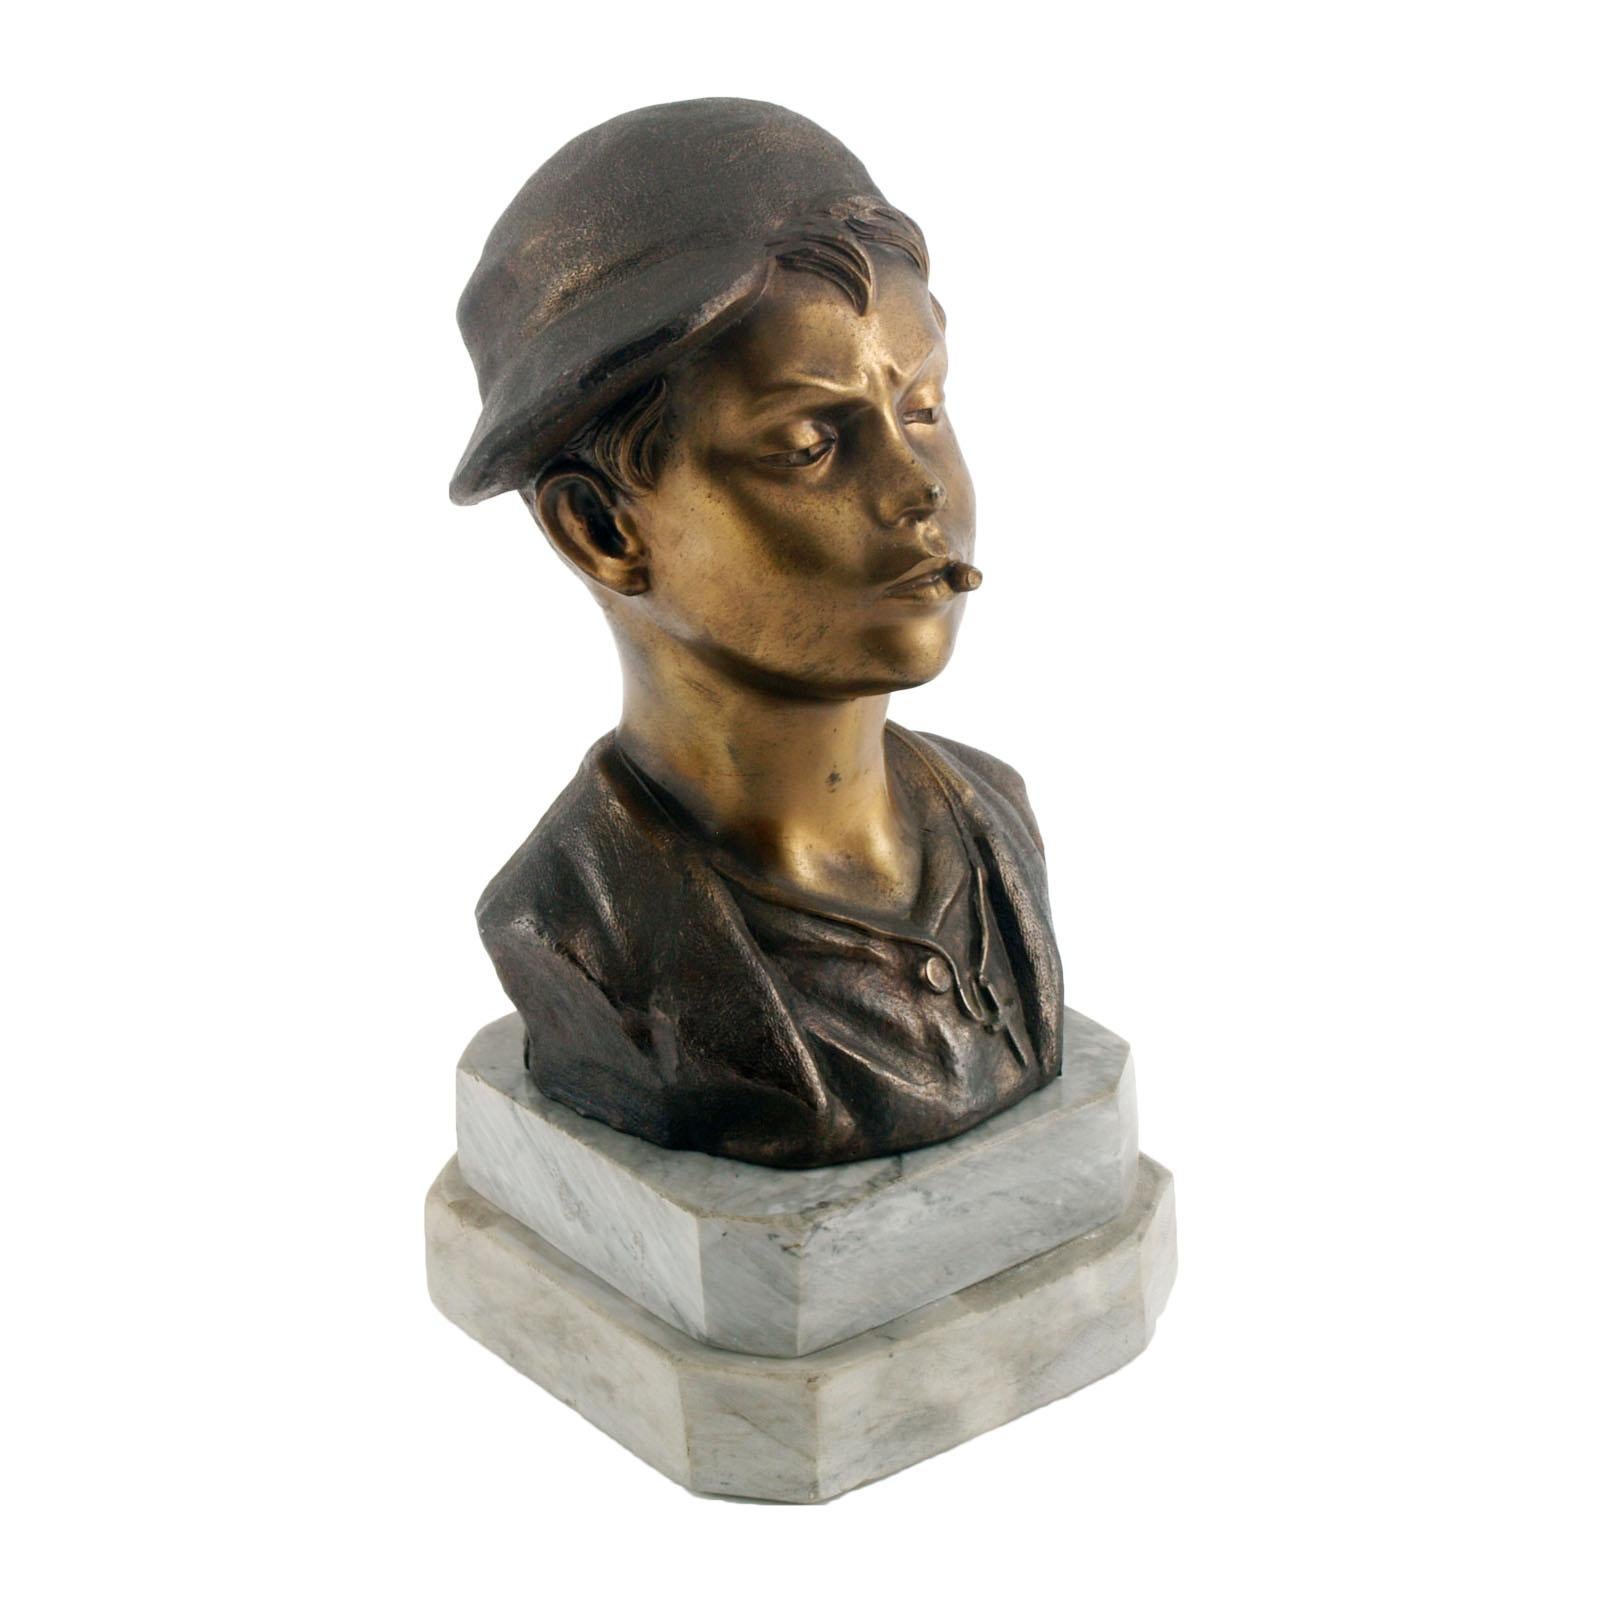 Art Deco Neapolitan 'Scugnizzo' Bust by De Martino, Gilt and Burnished Bronze For Sale